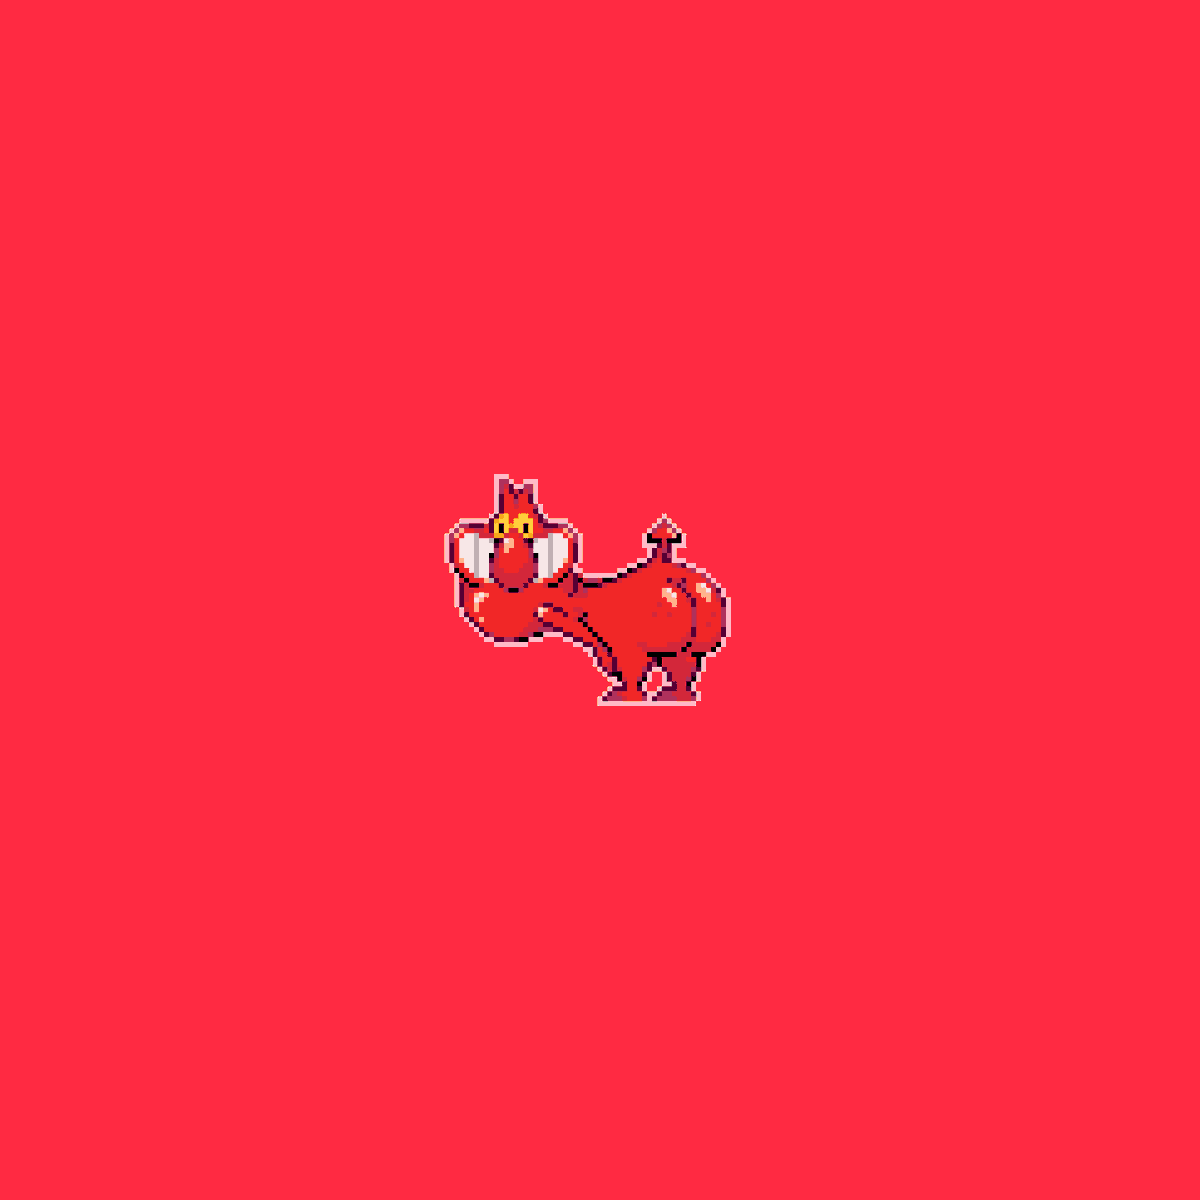 I wanted to make some ASS so here we are~ ❤️📛🔴🟥

Red Guy from Cow n Chicken entering from Cartoon Network 🦀🦞

Check the process on my Kofi~!📷

#pixel_dailies #pixelart #pixelartist #aseprite #CowAndChicken #RedGuy #Red #CartoonNetwork